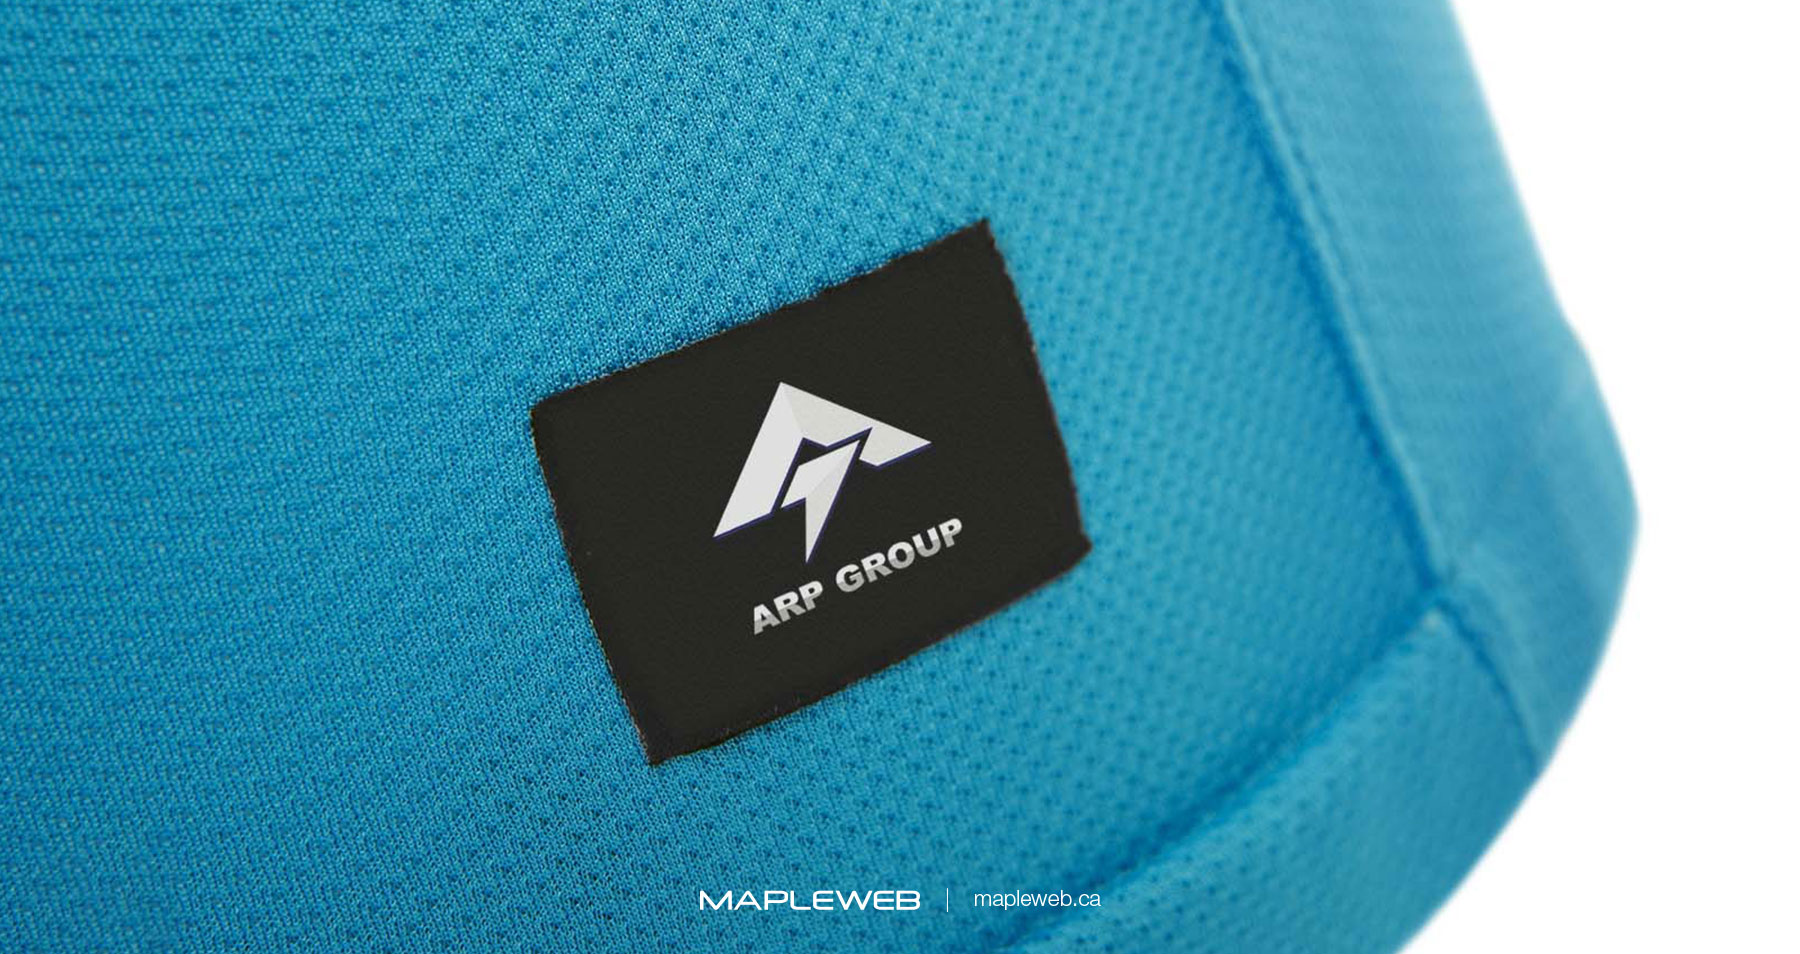 Arp Group Brand Label on Blue Cloth design by Mapleweb